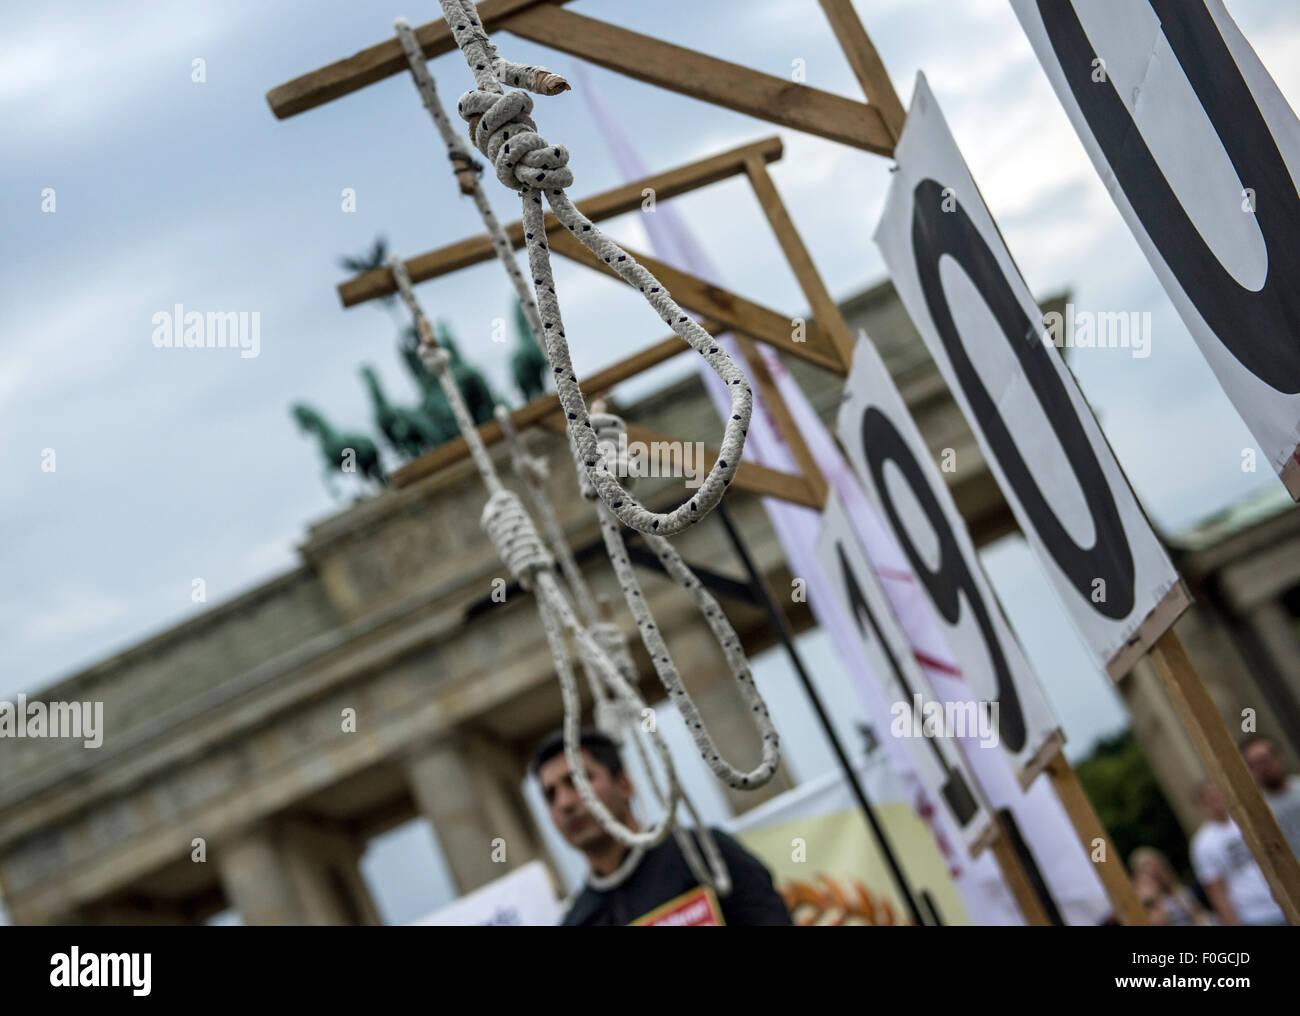 Berlin, Germany. 15th Aug, 2015. Hangman's nooses of symbolic gallows hang in front of the Brandenburg Gate in Berlin, Germany, 15 August 2015. The Deutsch-Iranische Gesellschaft (lit. German-Iranian Society) held an event on the Pariser Platz square to protest against executions in Iran. Photo: PAUL ZINKEN/dpa/Alamy Live News Stock Photo